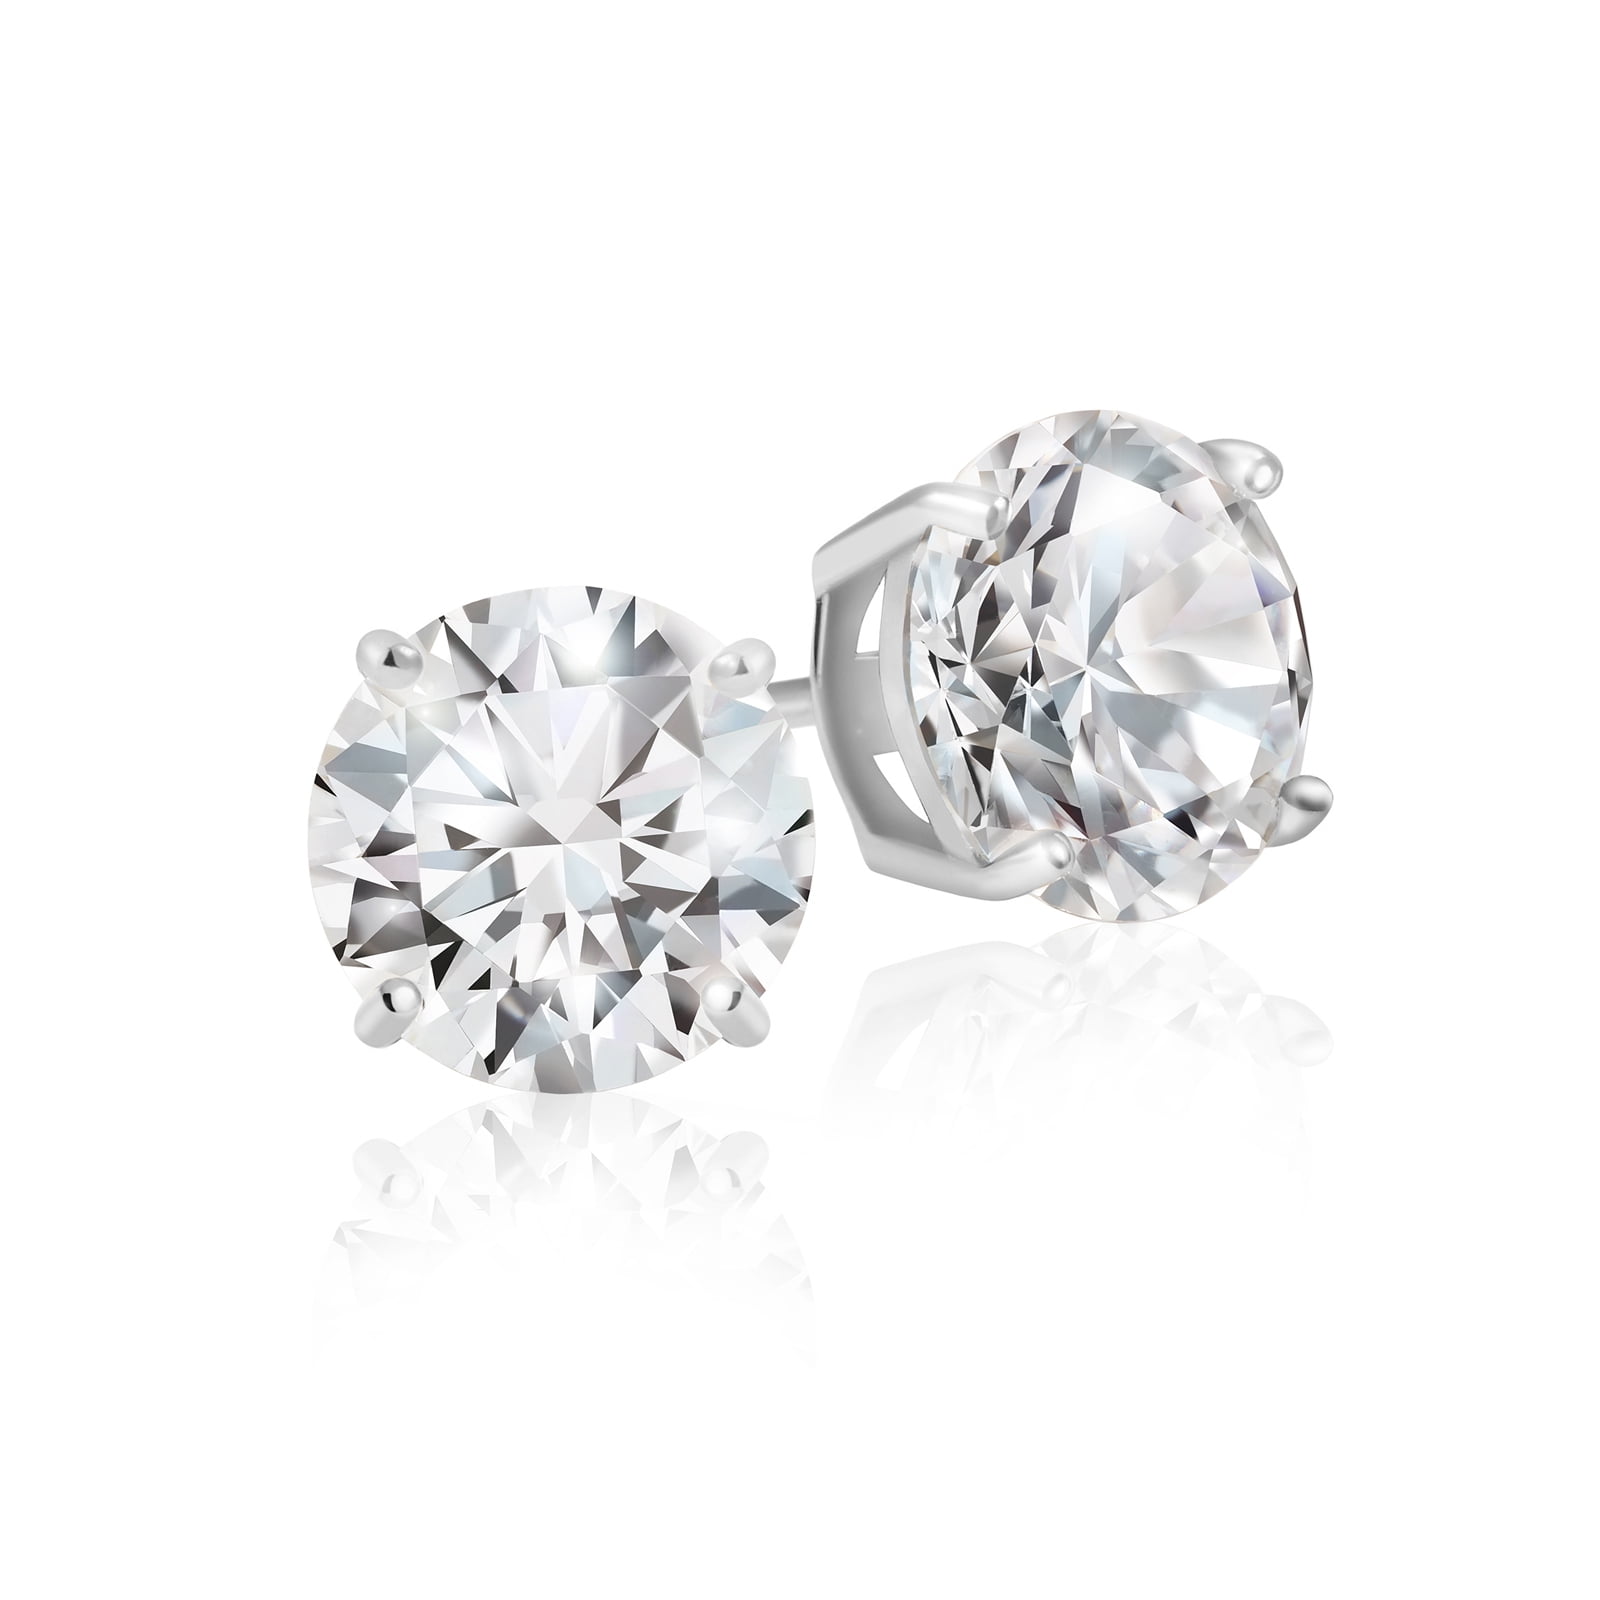 5mm .925 Sterling Silver Square Round CZ Cubic Zirconia Studs Earrings Box H11 